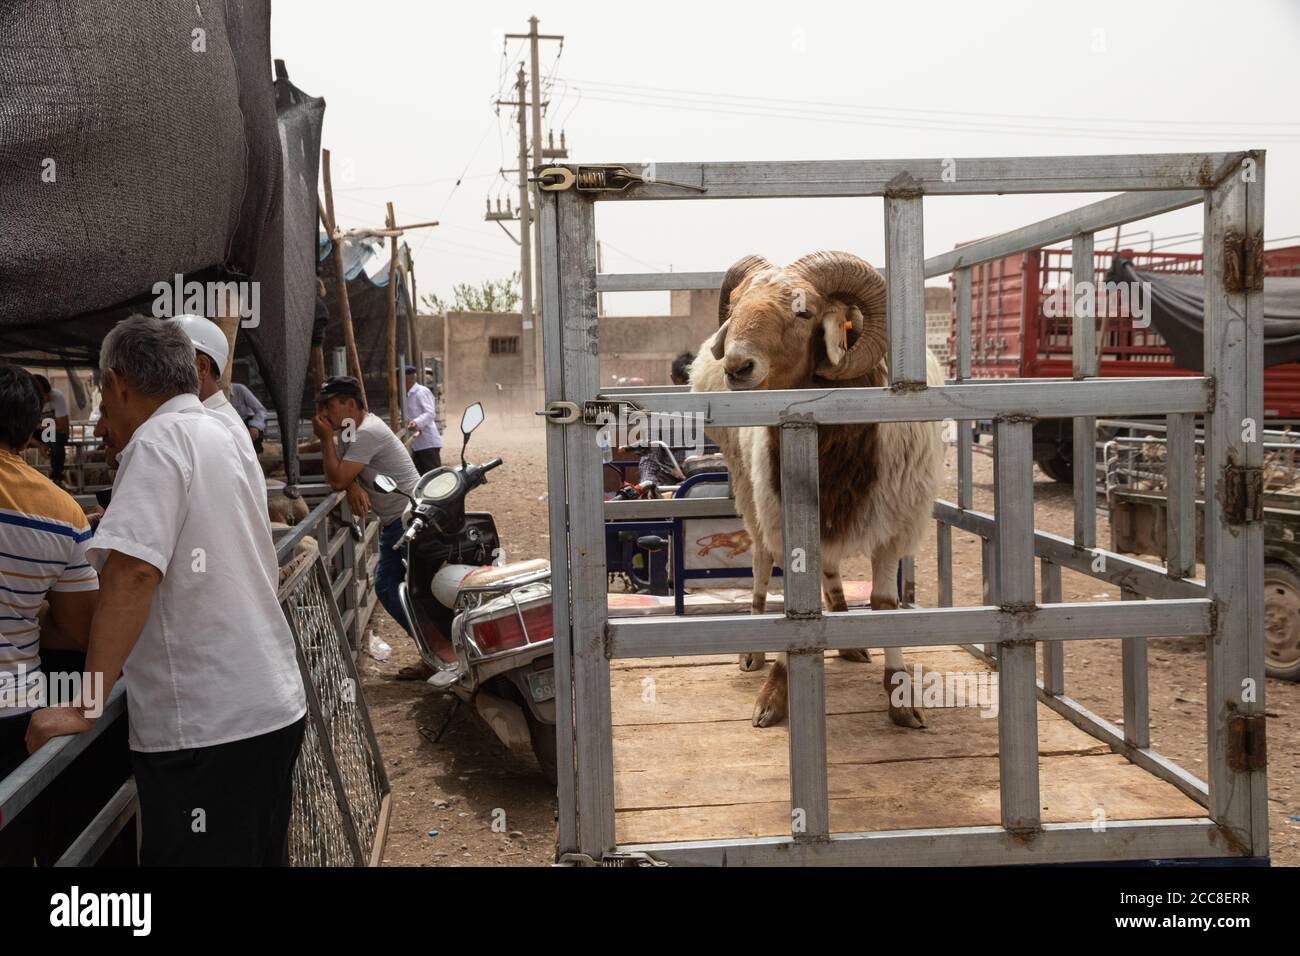 KASHGAR, CHINA: A ram in a cage on the back of a motorbike waiting to be sold at a sunday market in the Xinjiang Uyghur Autonomous Region Stock Photo